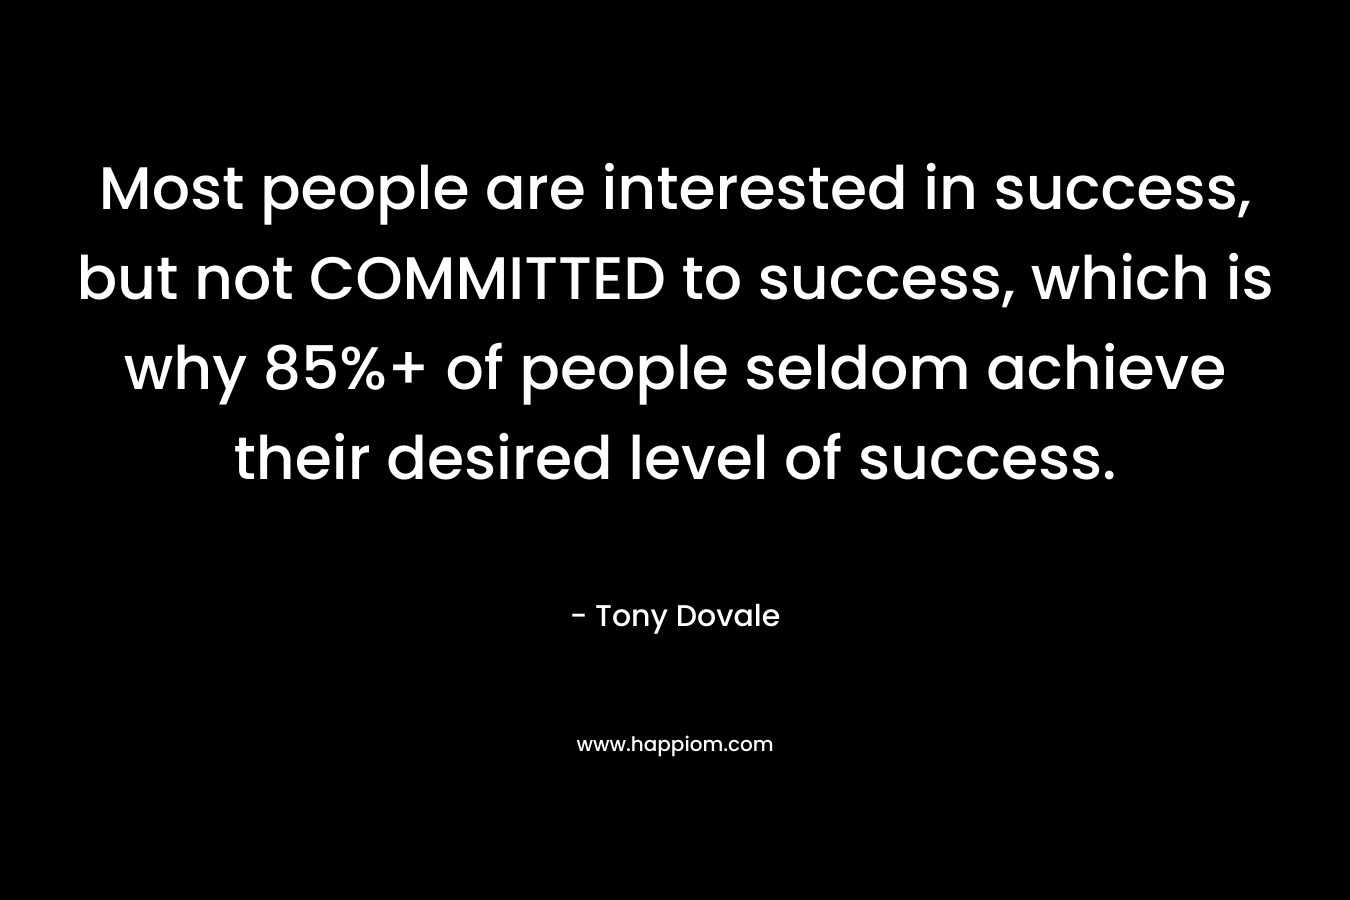 Most people are interested in success, but not COMMITTED to success, which is why 85%+ of people seldom achieve their desired level of success.